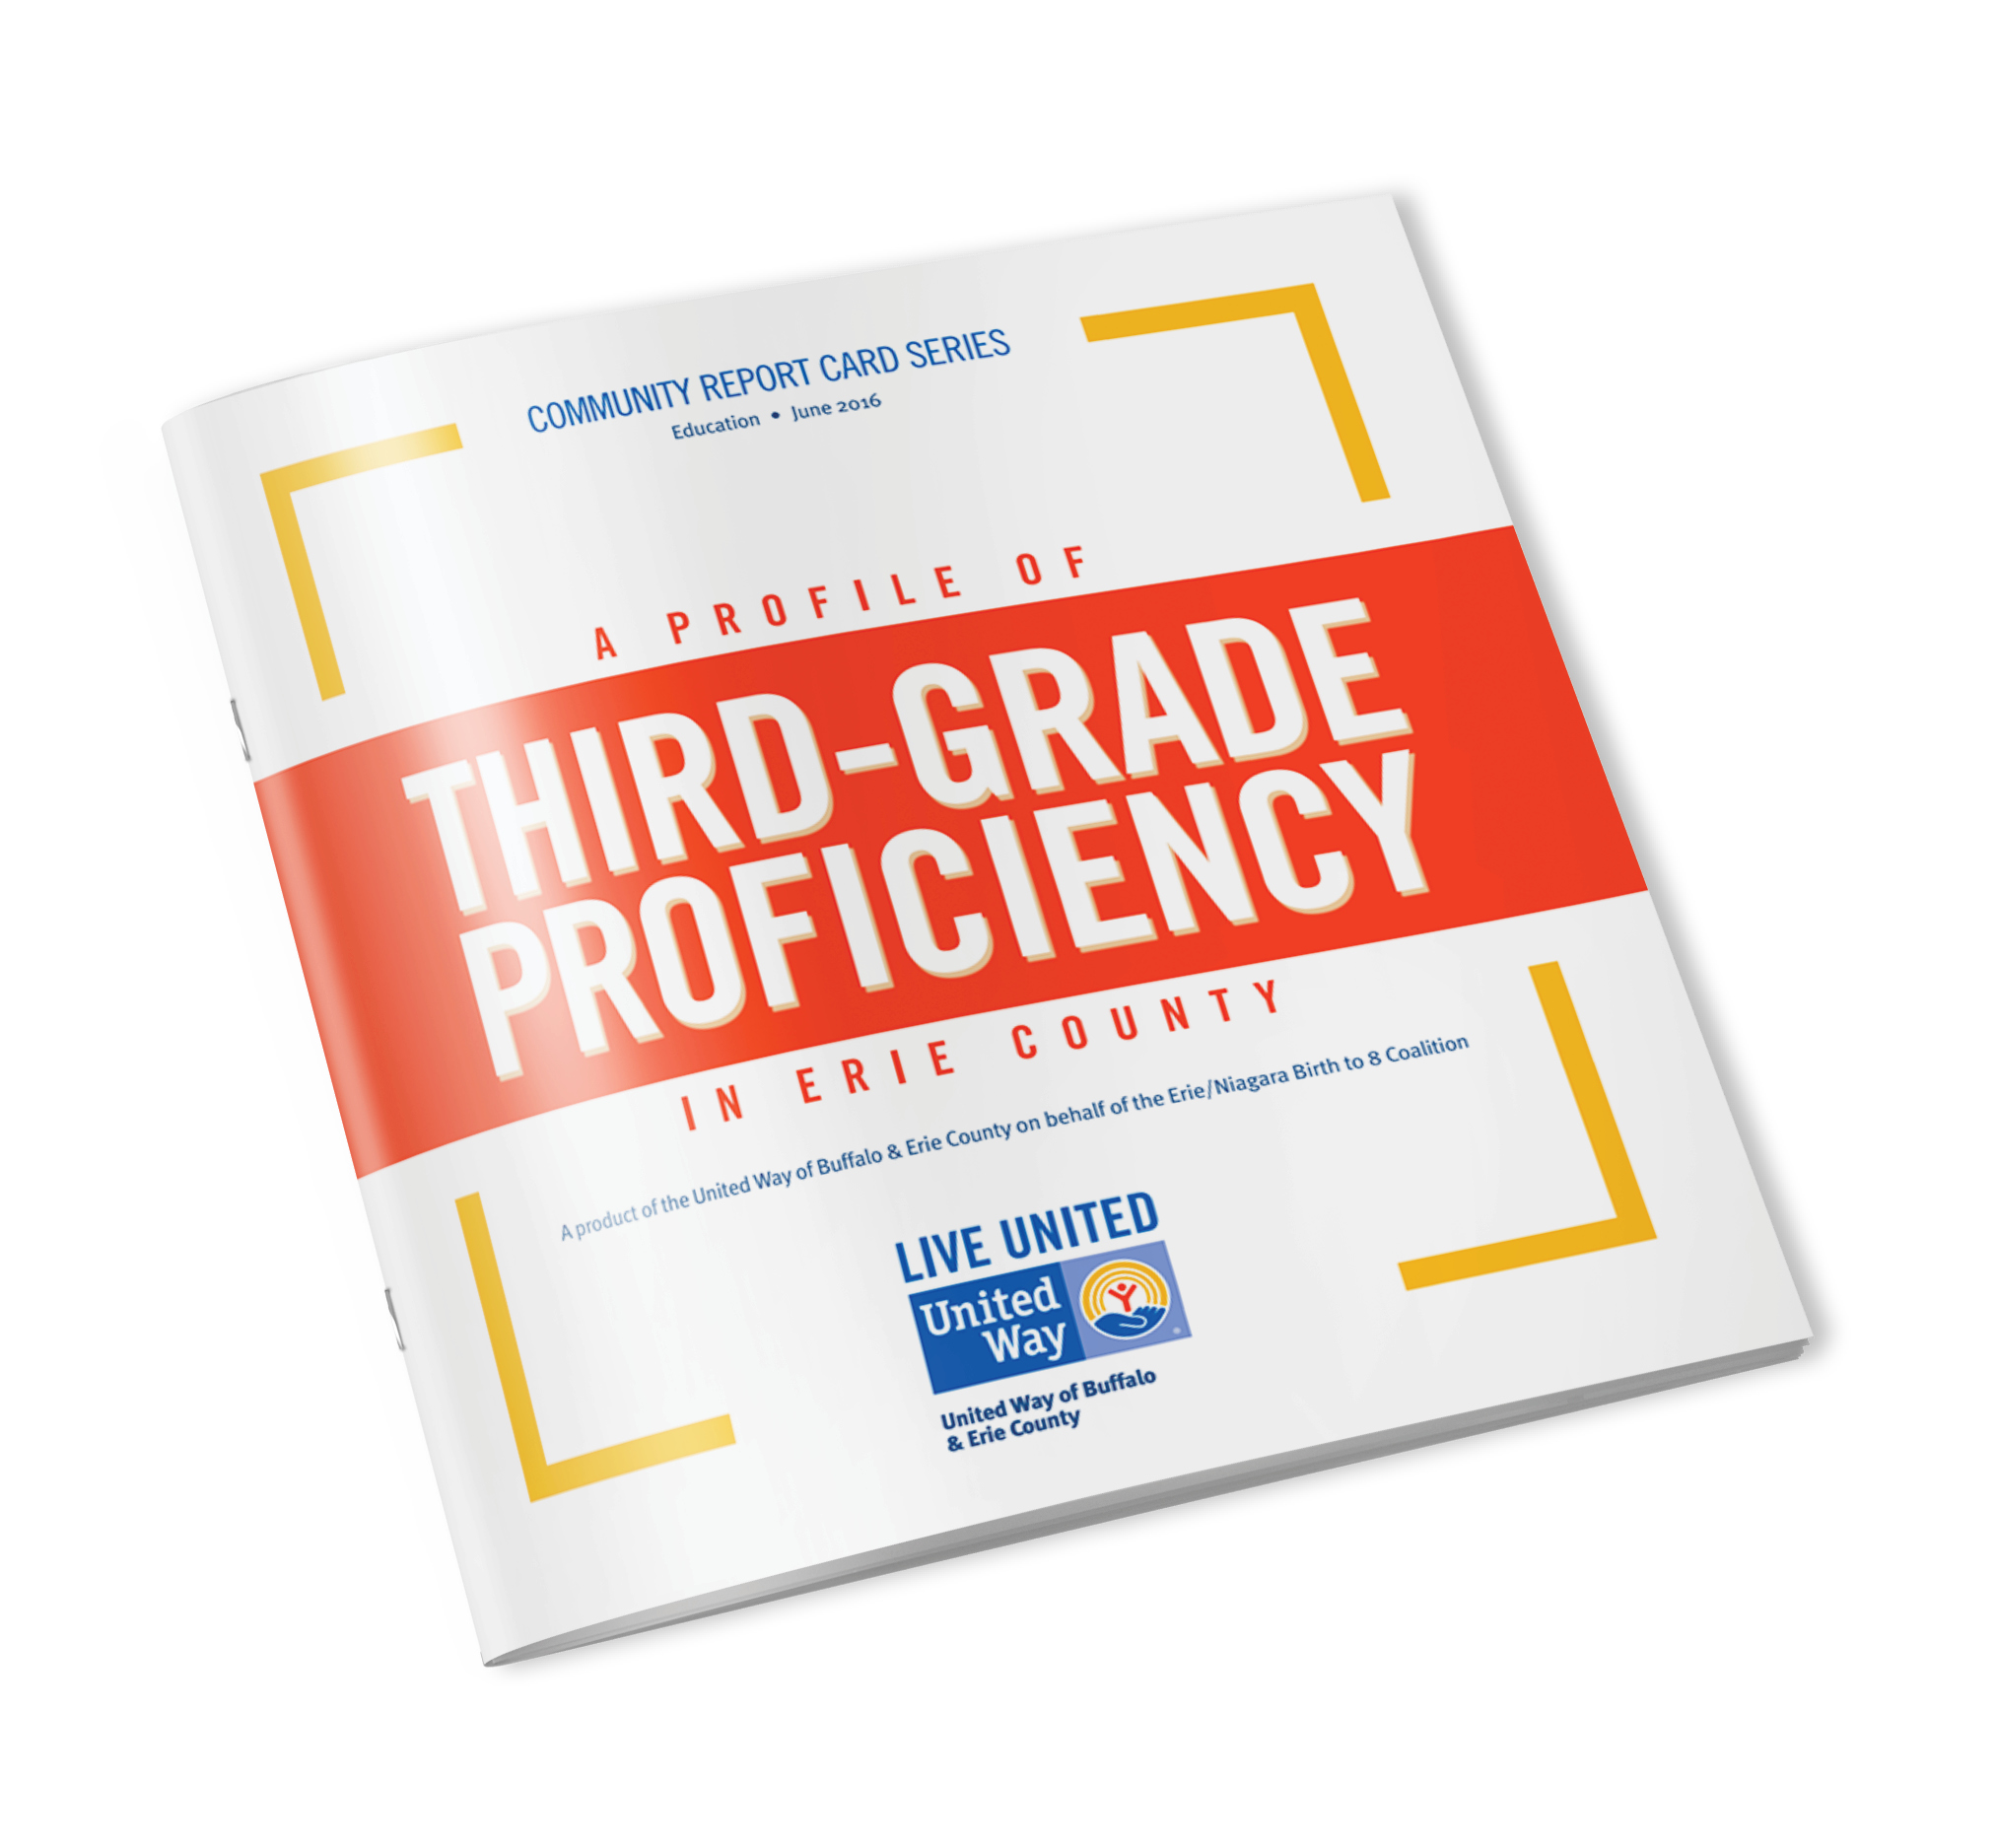 This is a picture of United Way's Third-Grade Proficiency information magazine. 